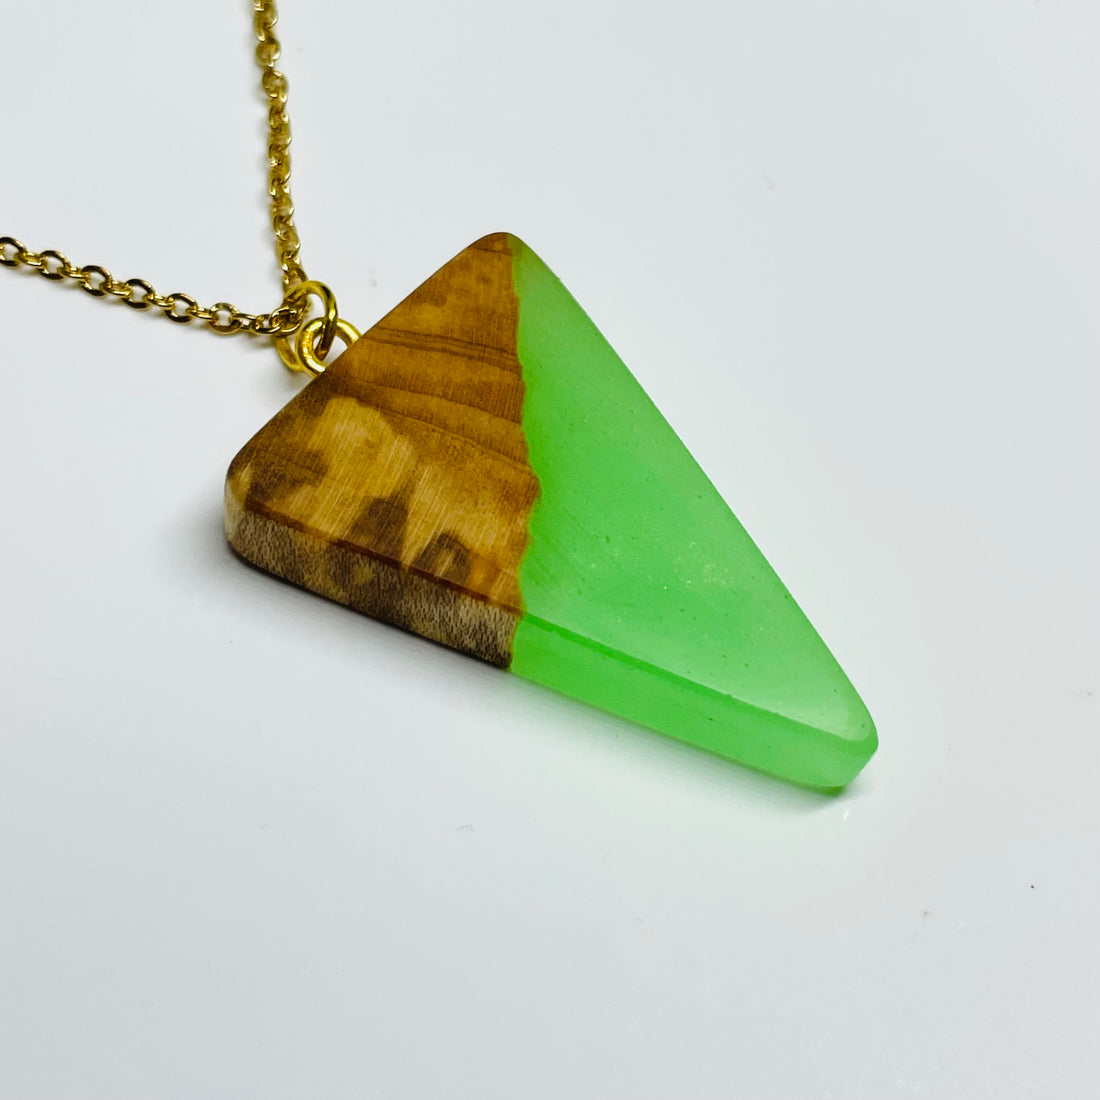 Wood and Resin Neon Green Maple Isosceles - Pendant/Necklace